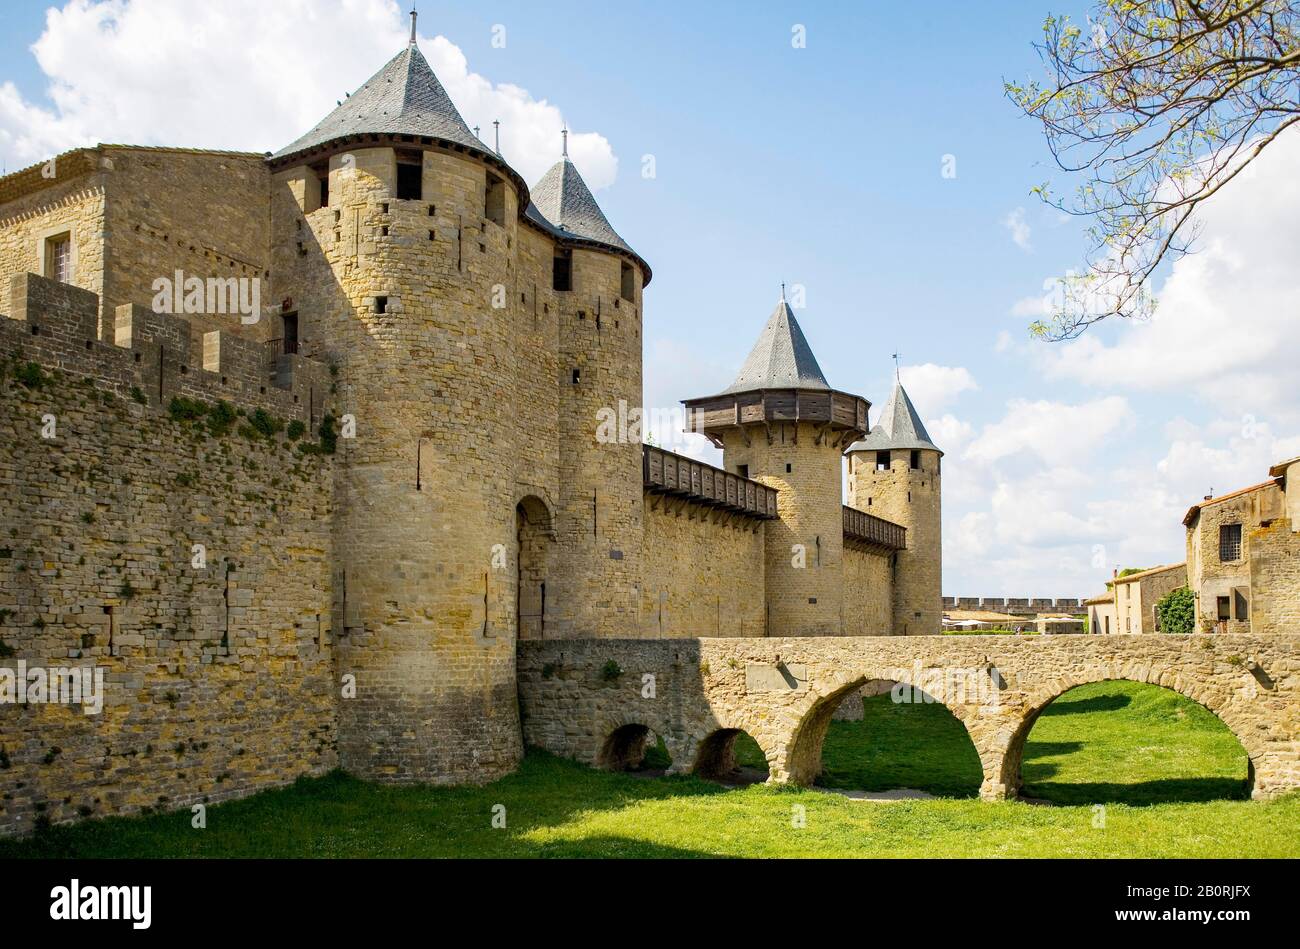 UNESCO World Heritage Site, Medieval fortified city, Carcassonne, Departement Aude, Languedoc-Rousillon, France Stock Photo